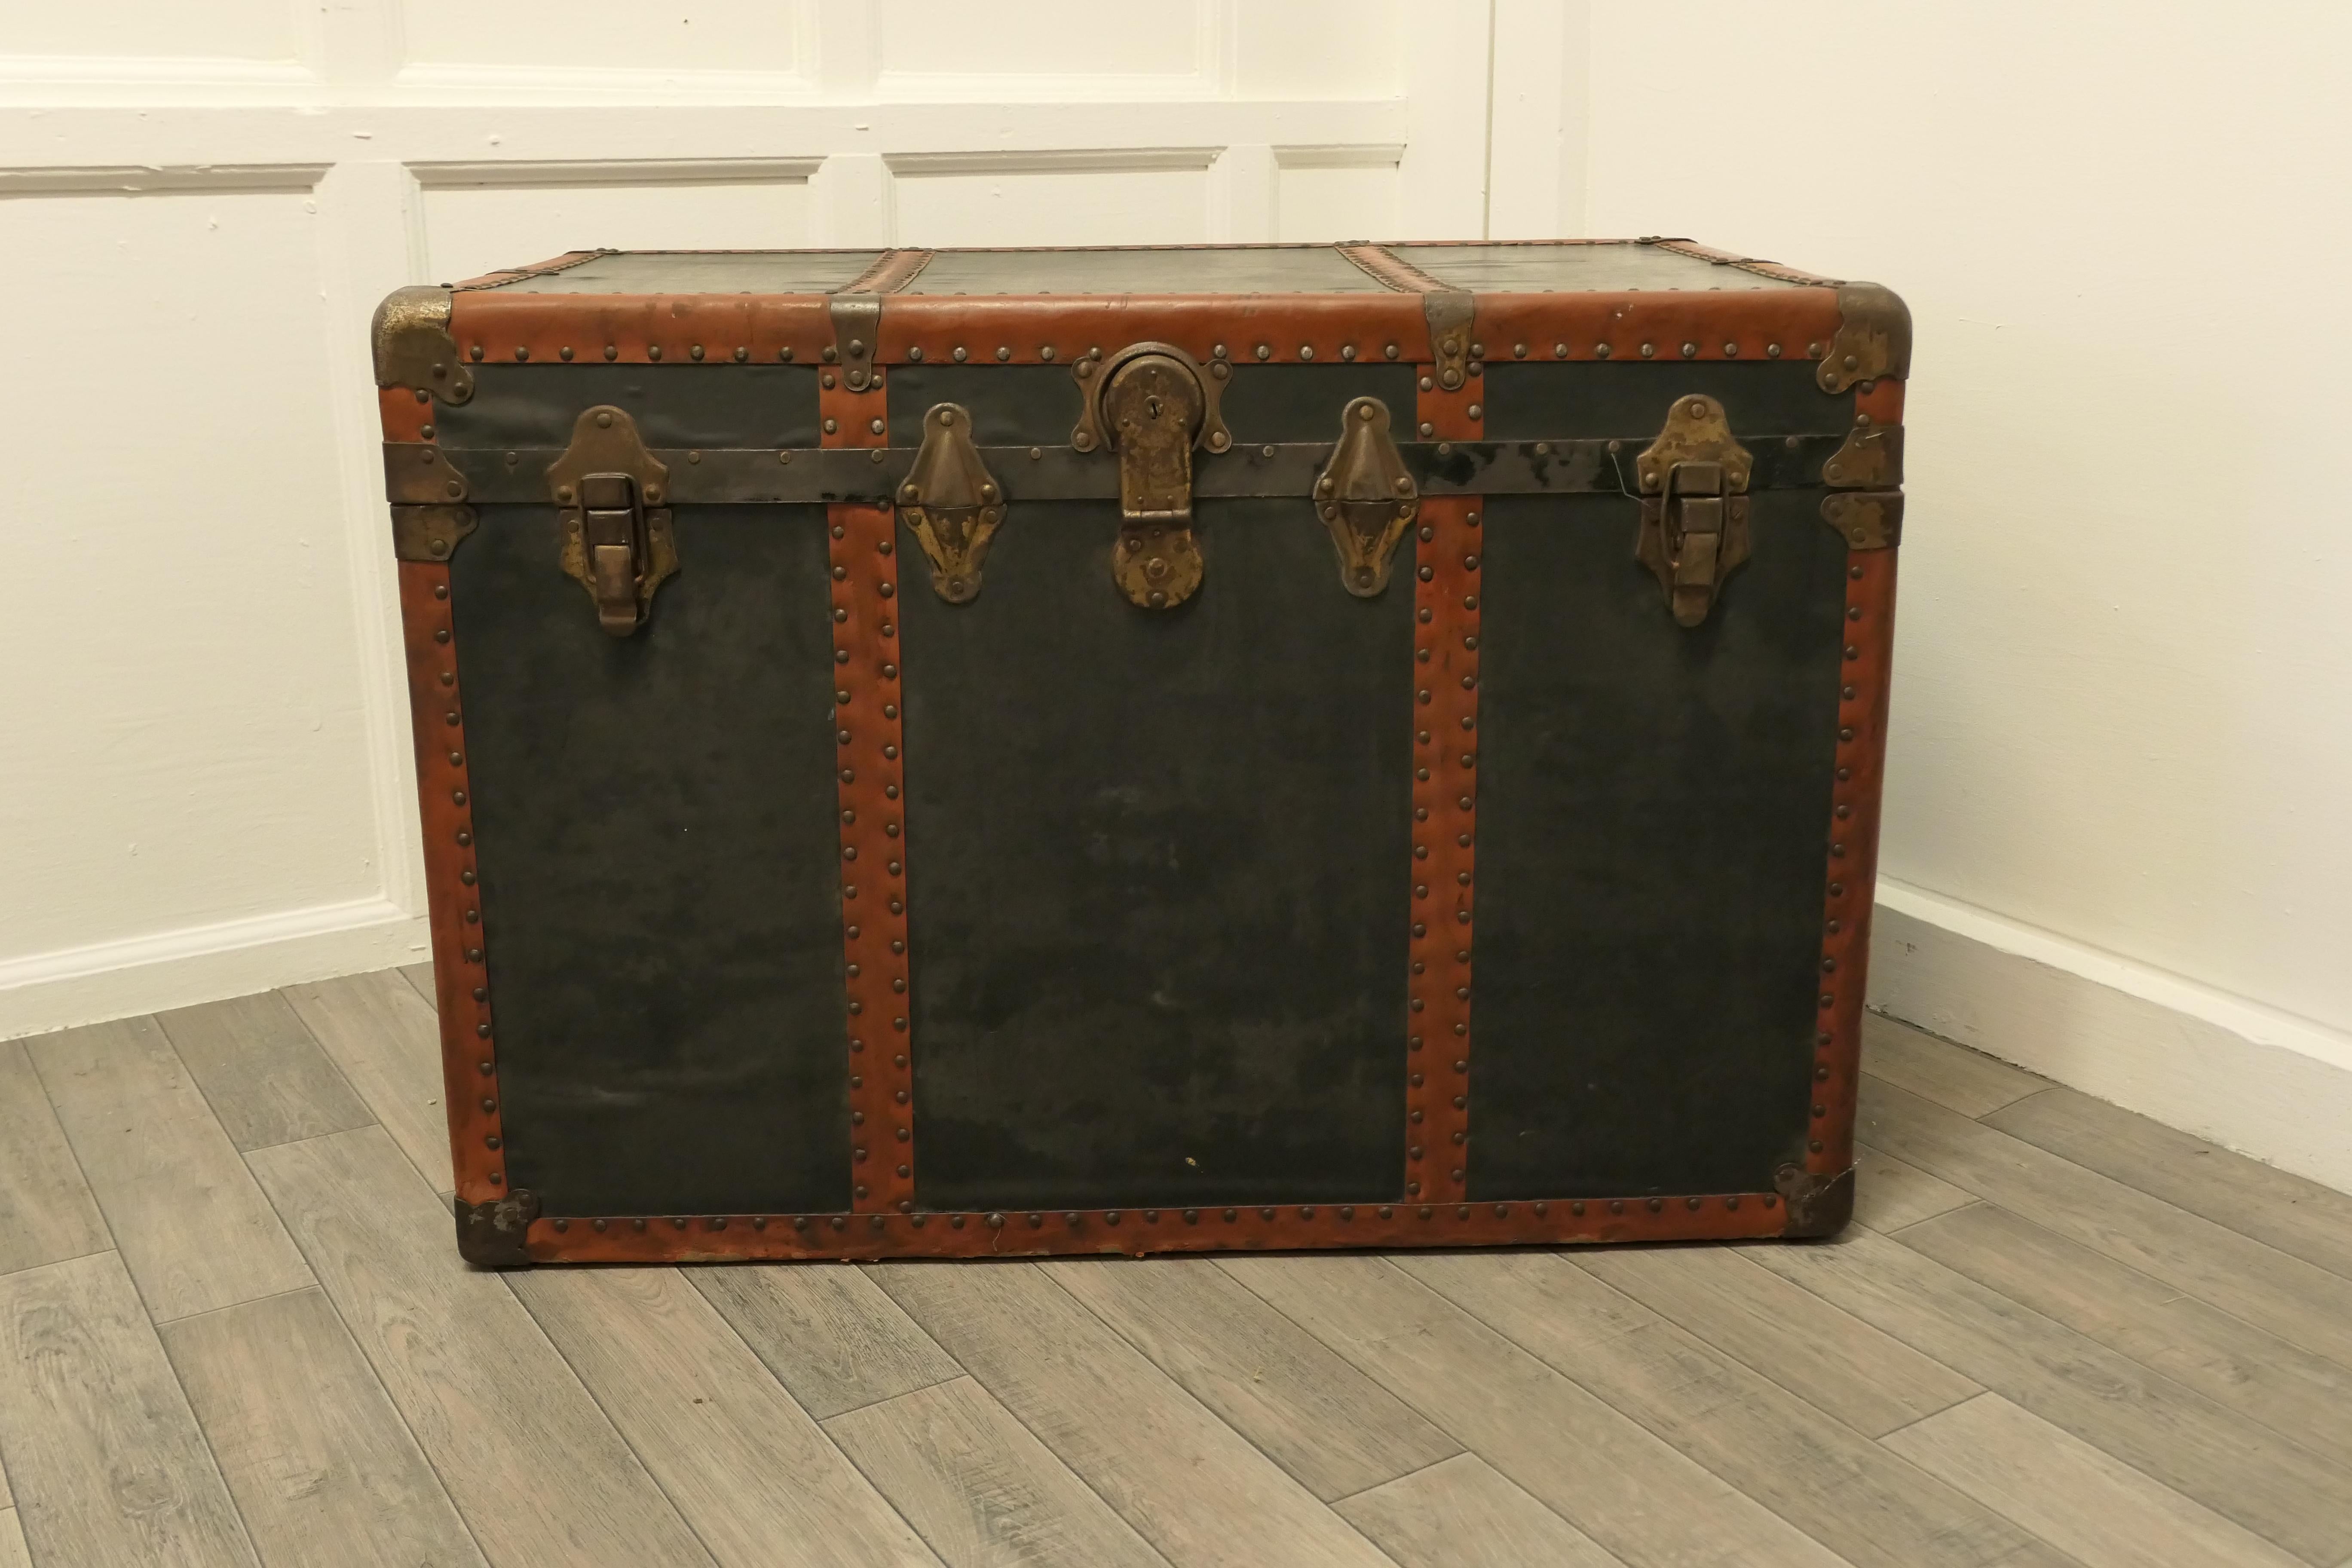 Large Vintage Rigid Breakless Co., Steamer Trunk 

A very useful Strong travel trunk from the Breakless Co. it is lined in paper fabric
The Trunk is covered with Strong vulcanised fibre material, it is very sound it has stood the test of time and